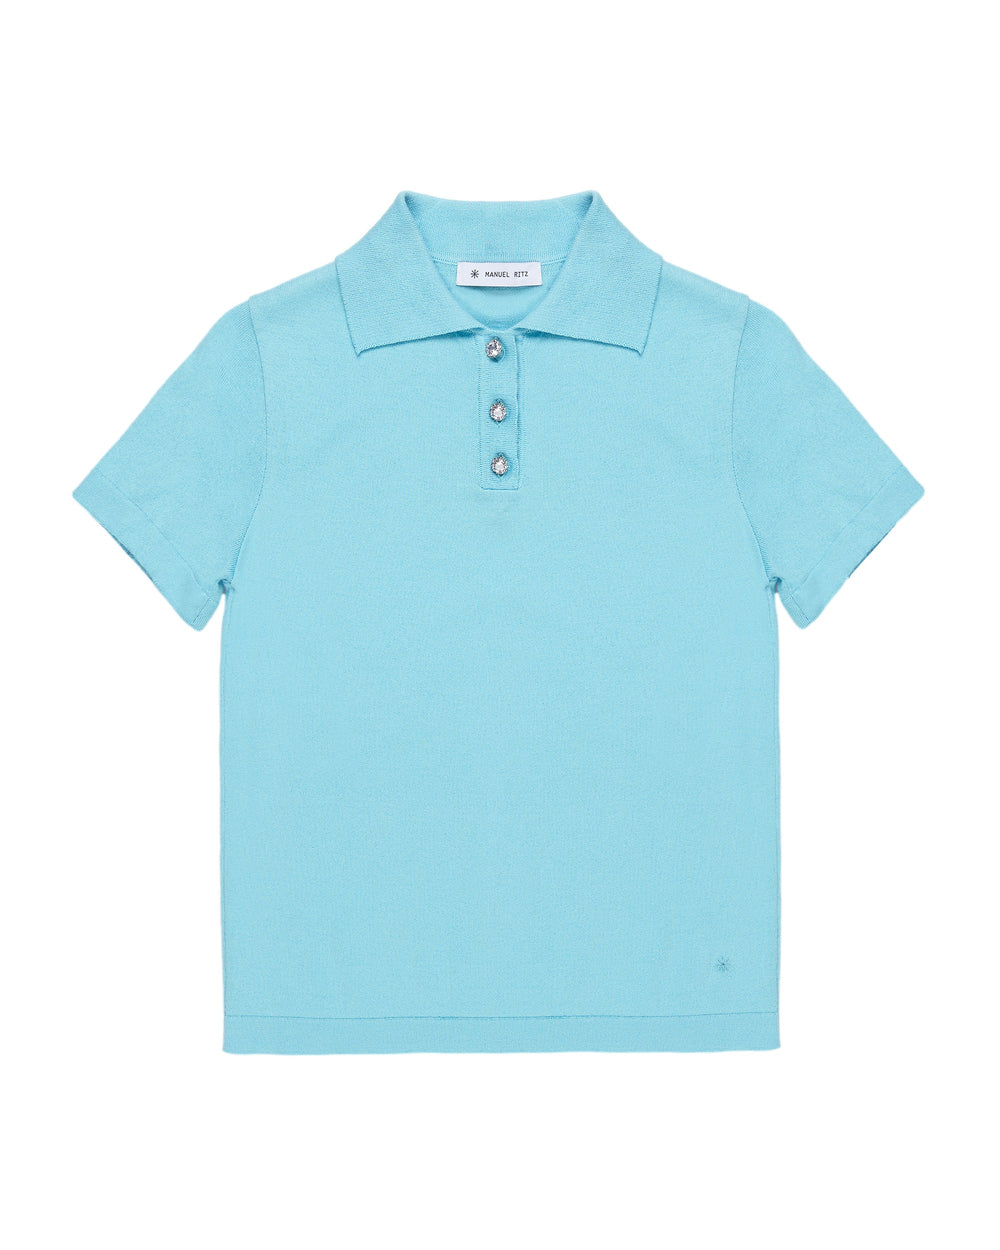 sky blue cotton polo shirt with jewel button